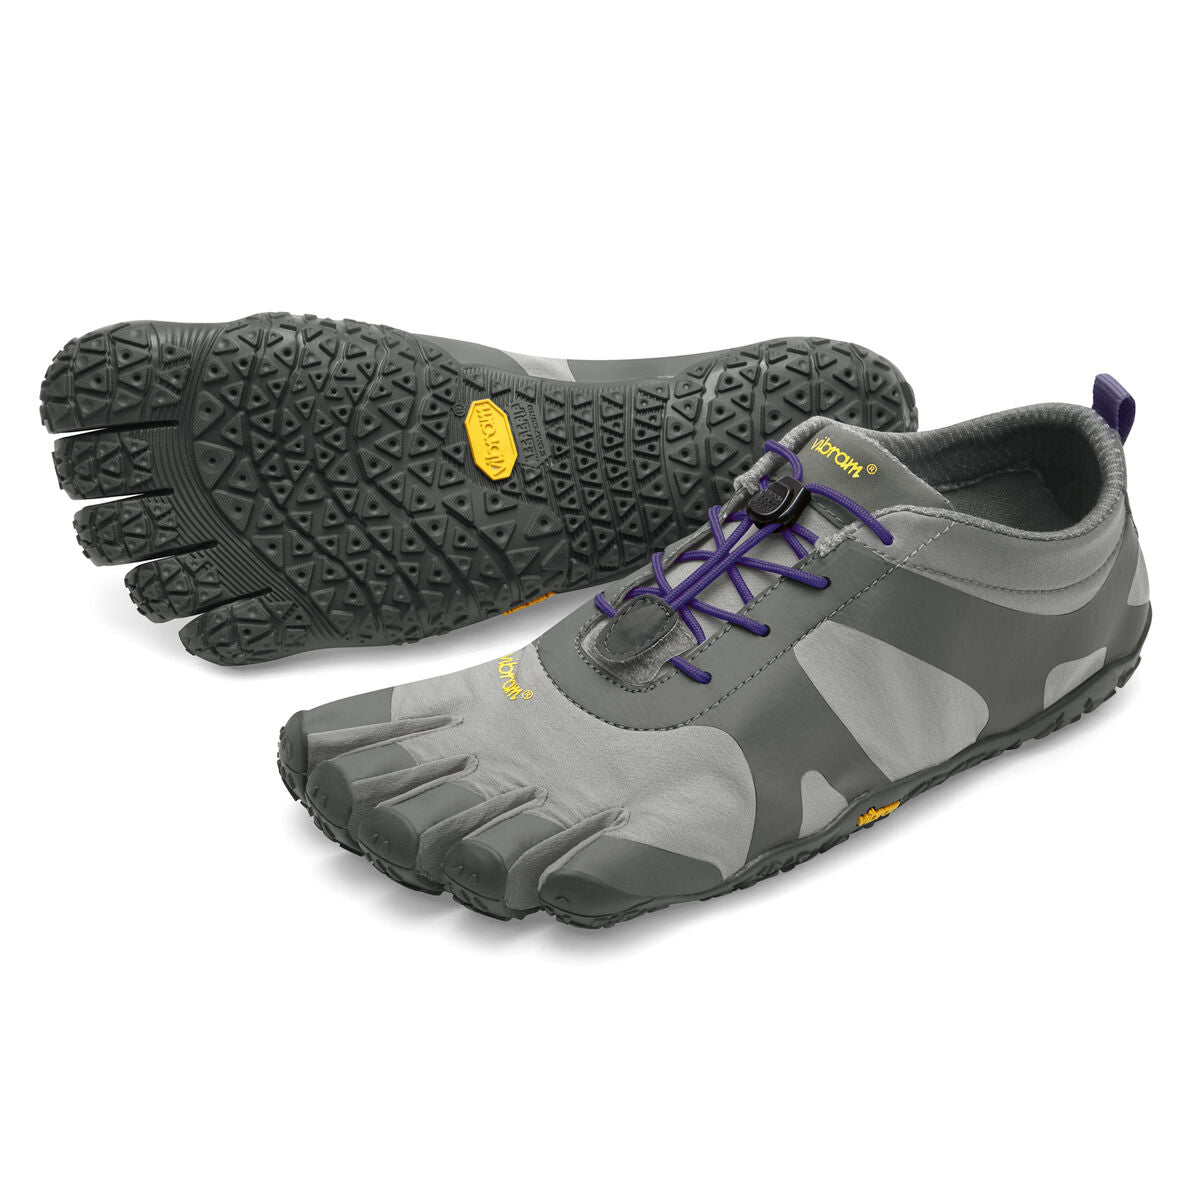 Women's Vibram Five Fingers V-Alpha Hiking Shoe in Grey/Violet from the front